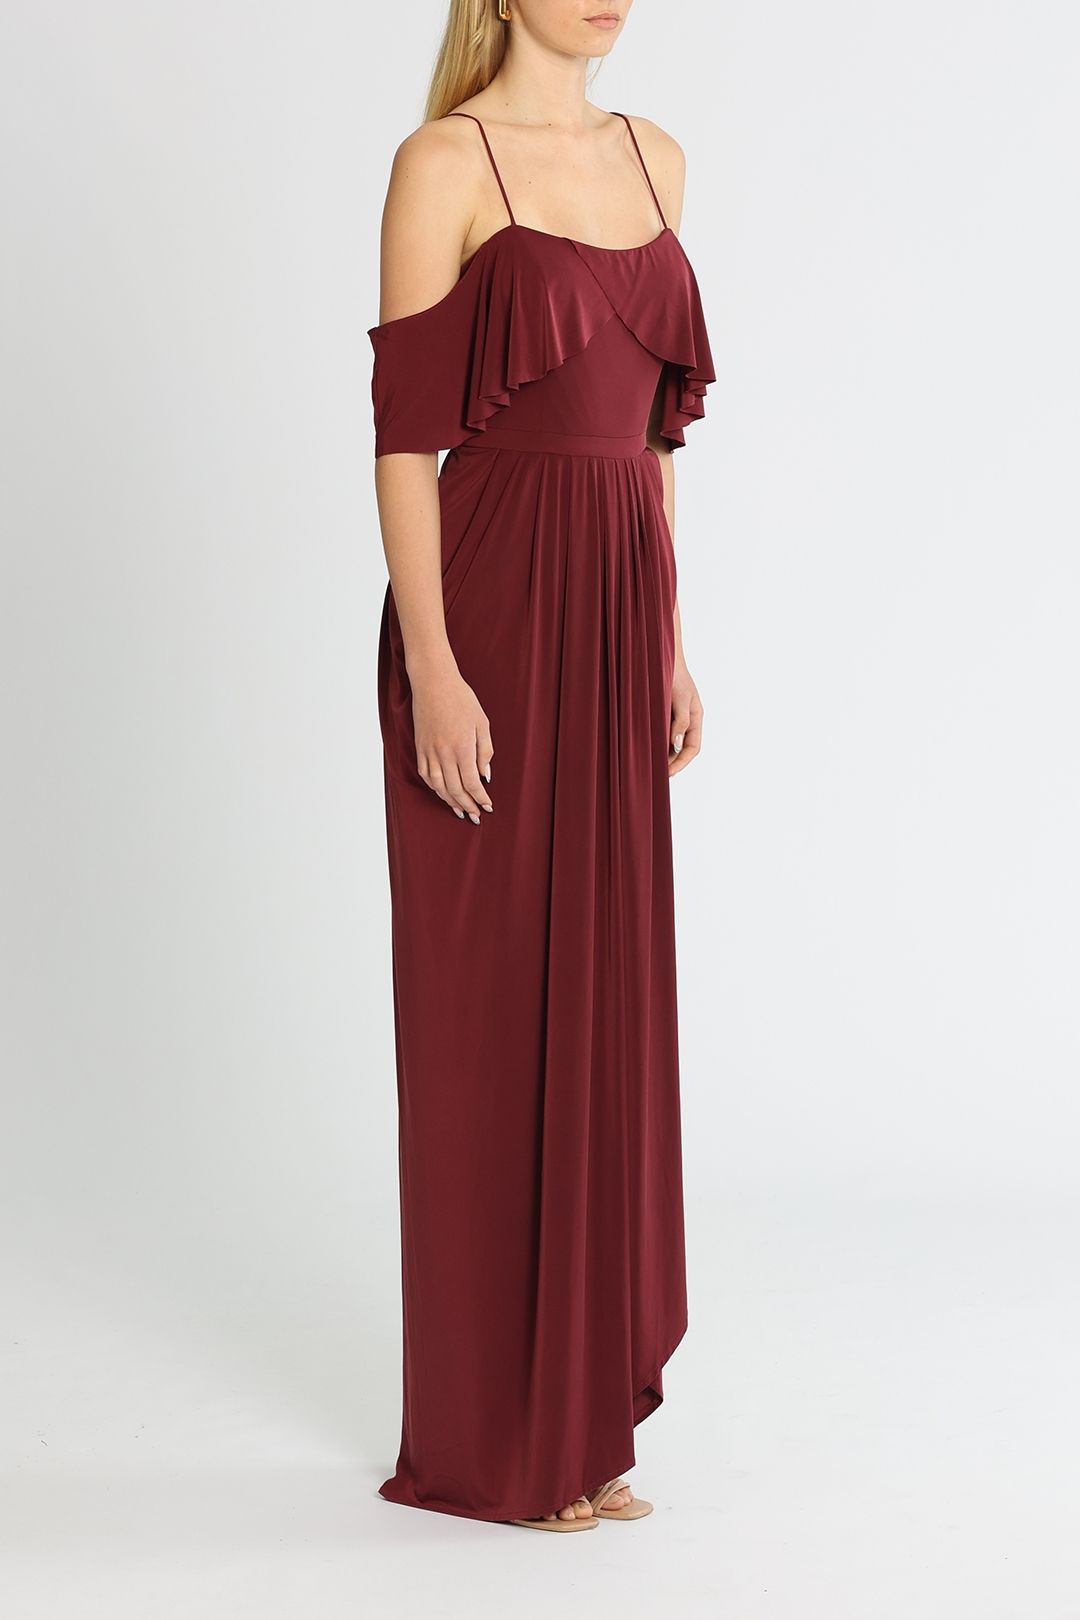 Tania Olsen Arianna Gown Wine Cold Shoulder